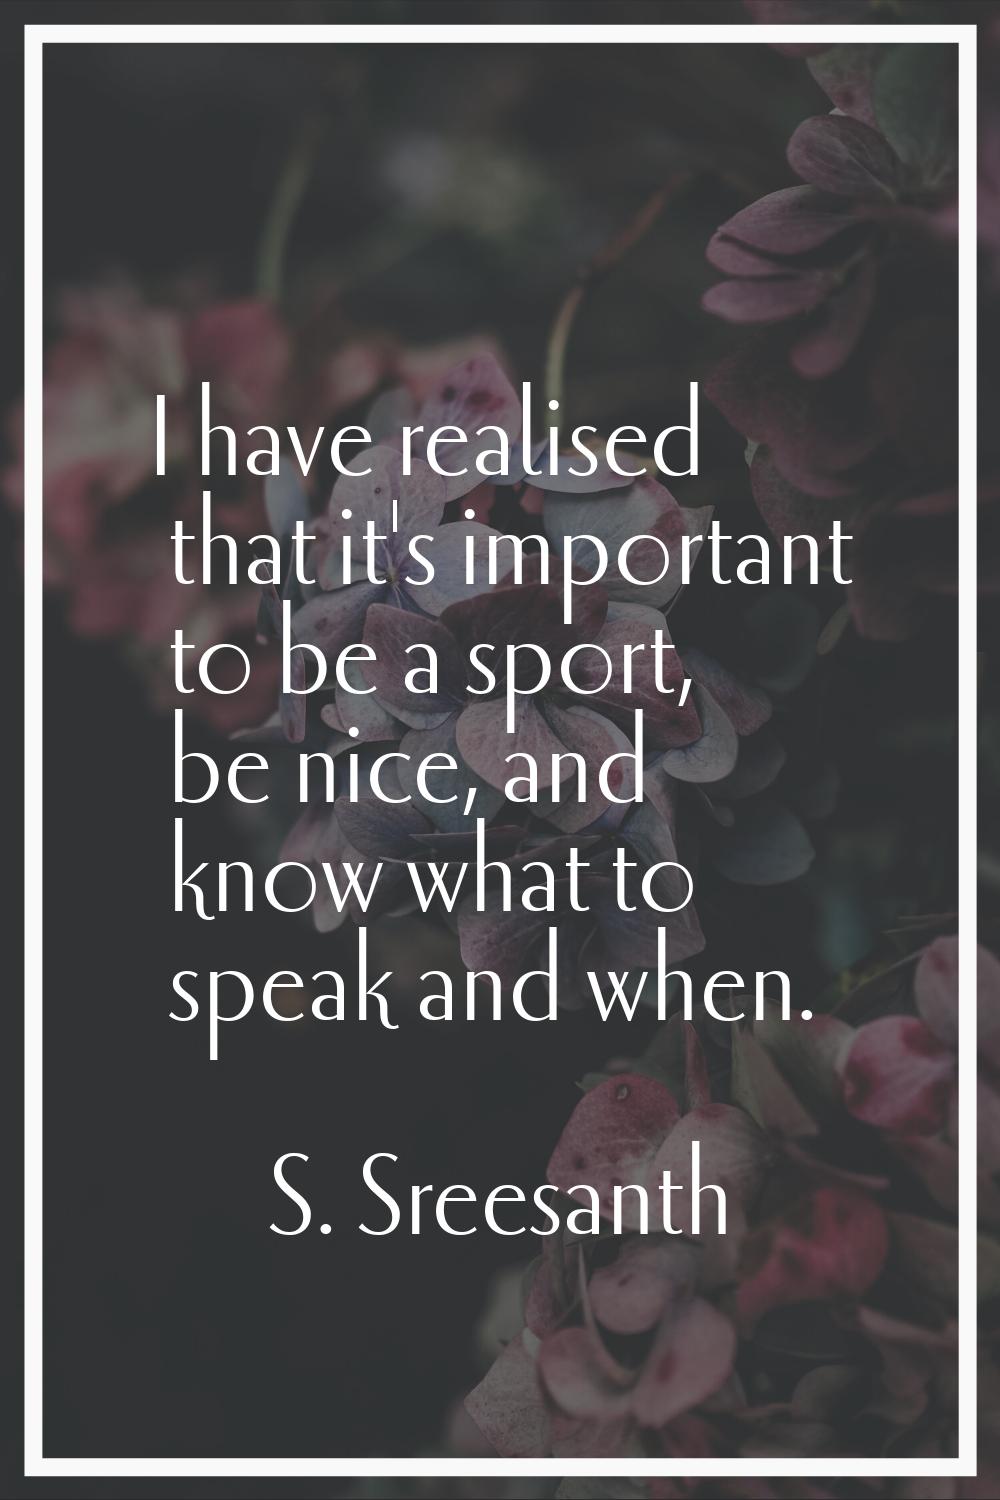 I have realised that it's important to be a sport, be nice, and know what to speak and when.